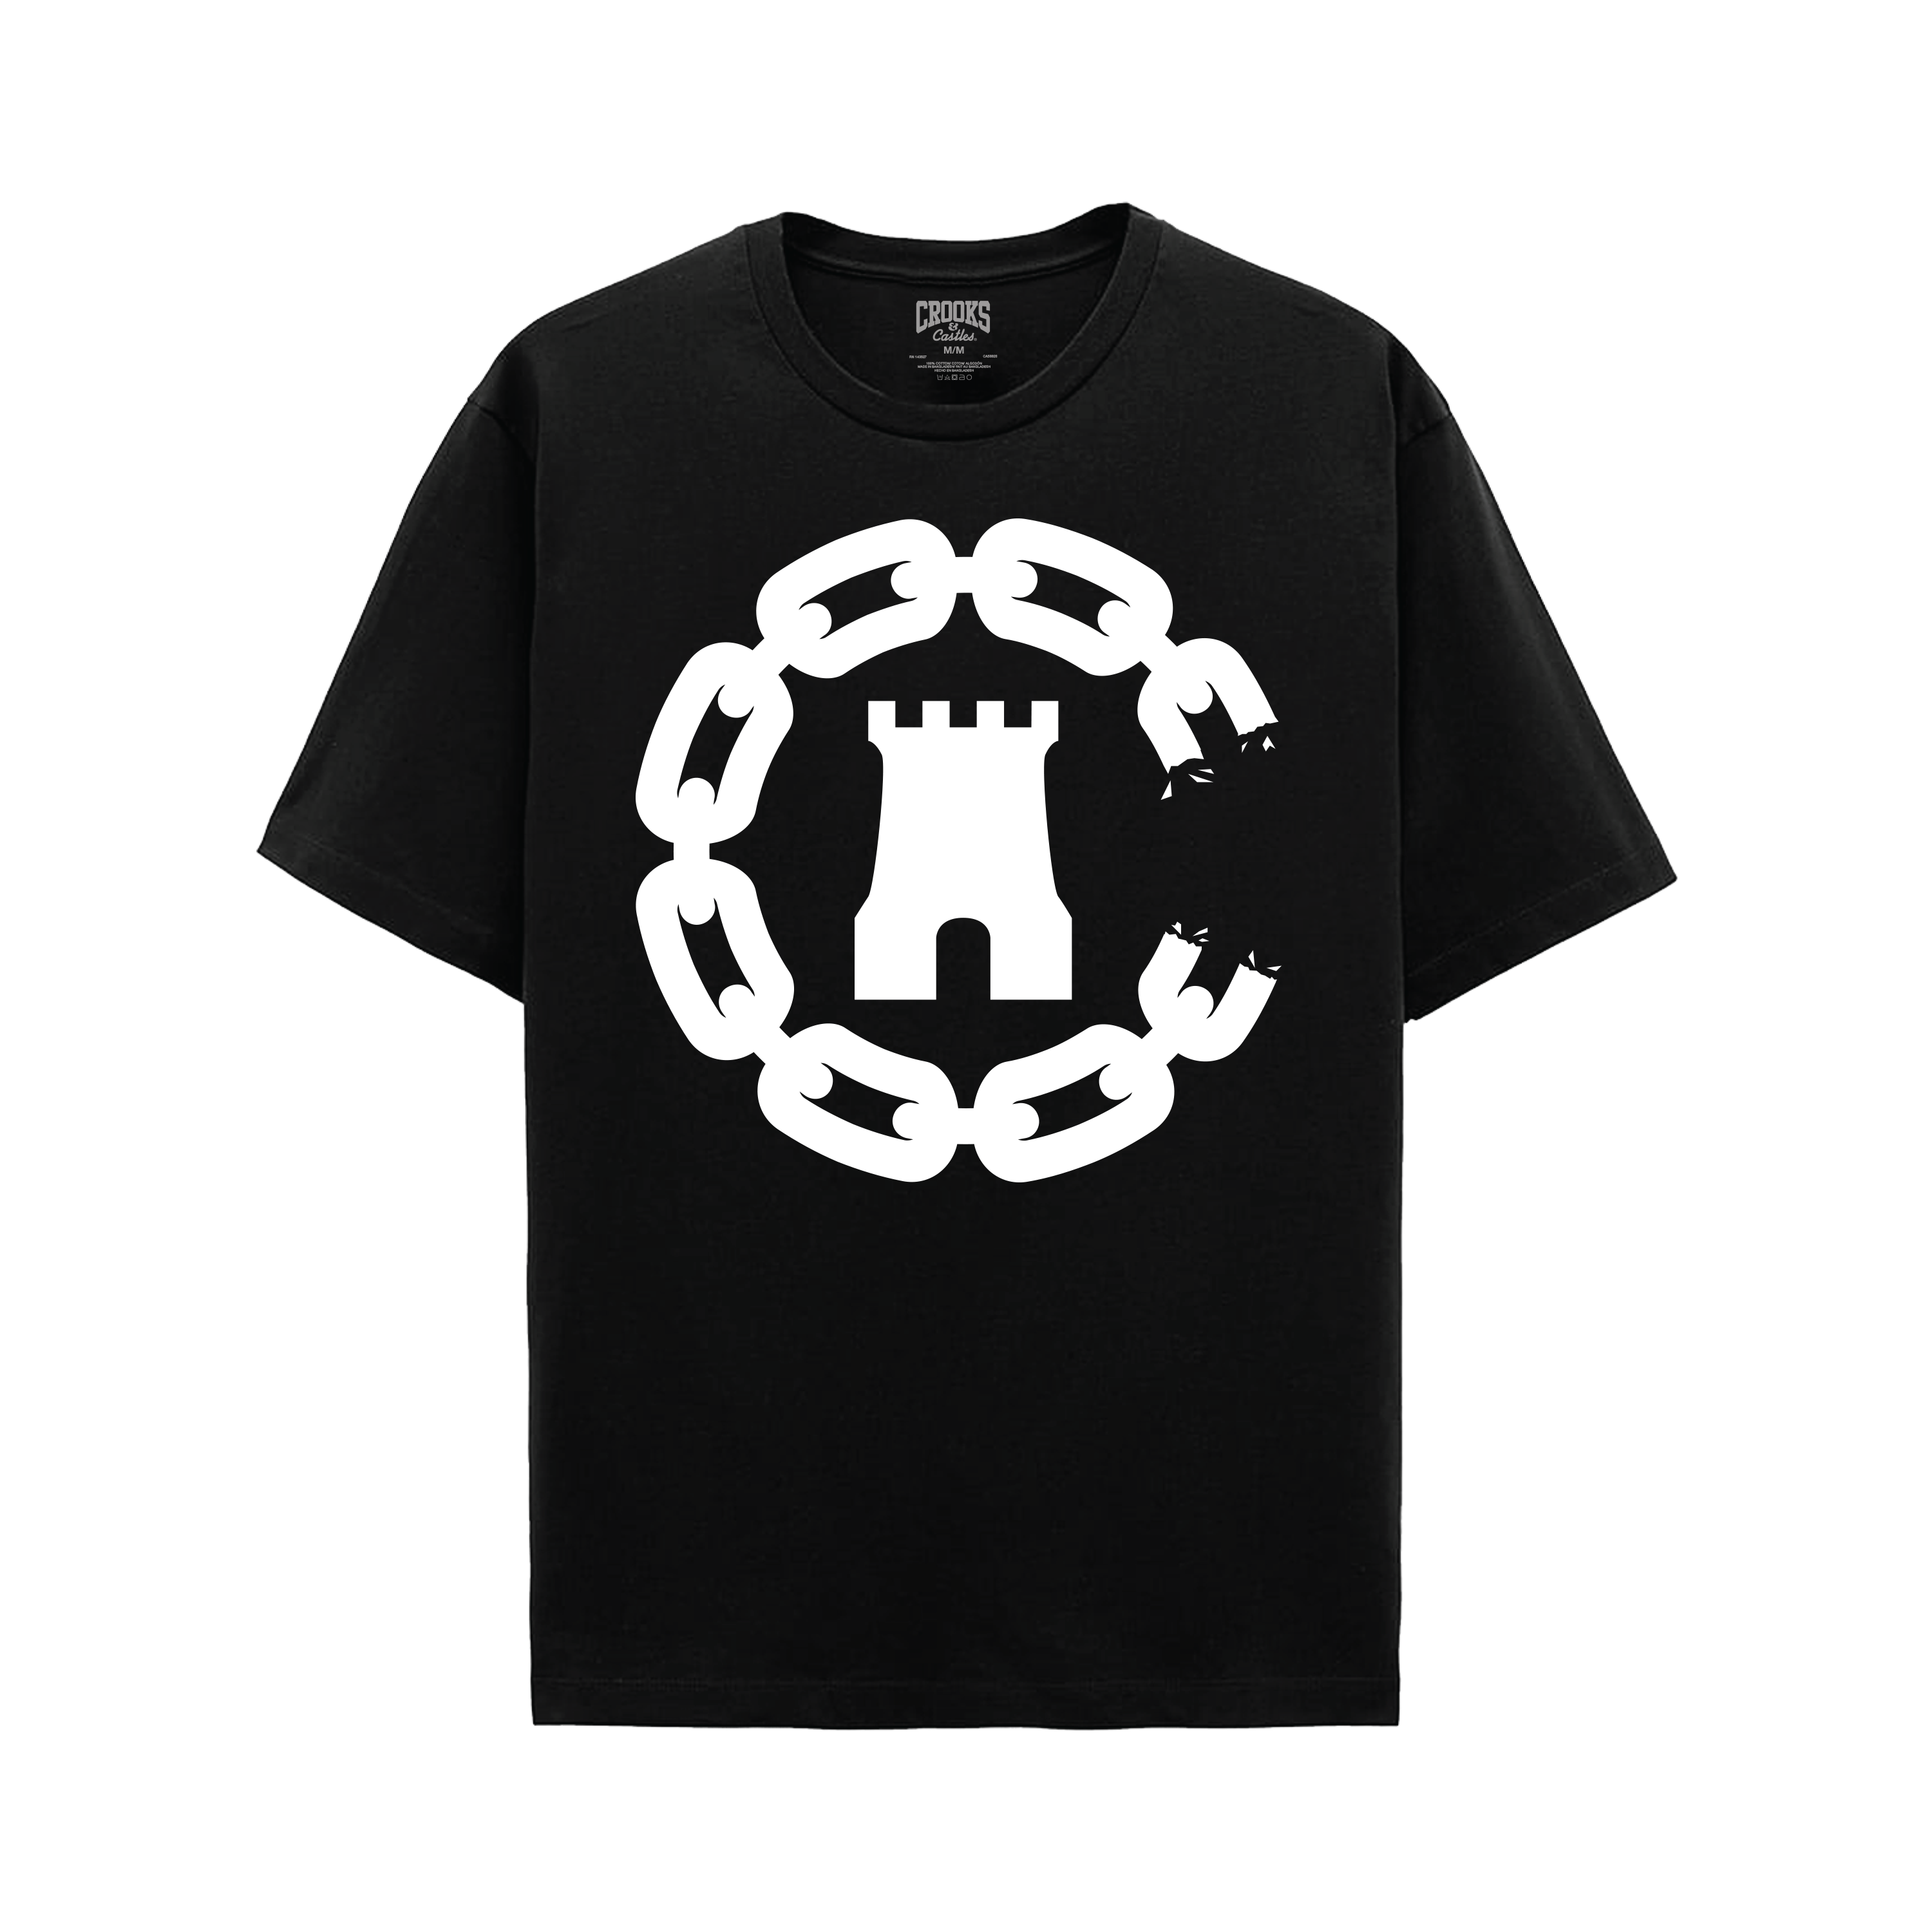 The Chain Castle Tee